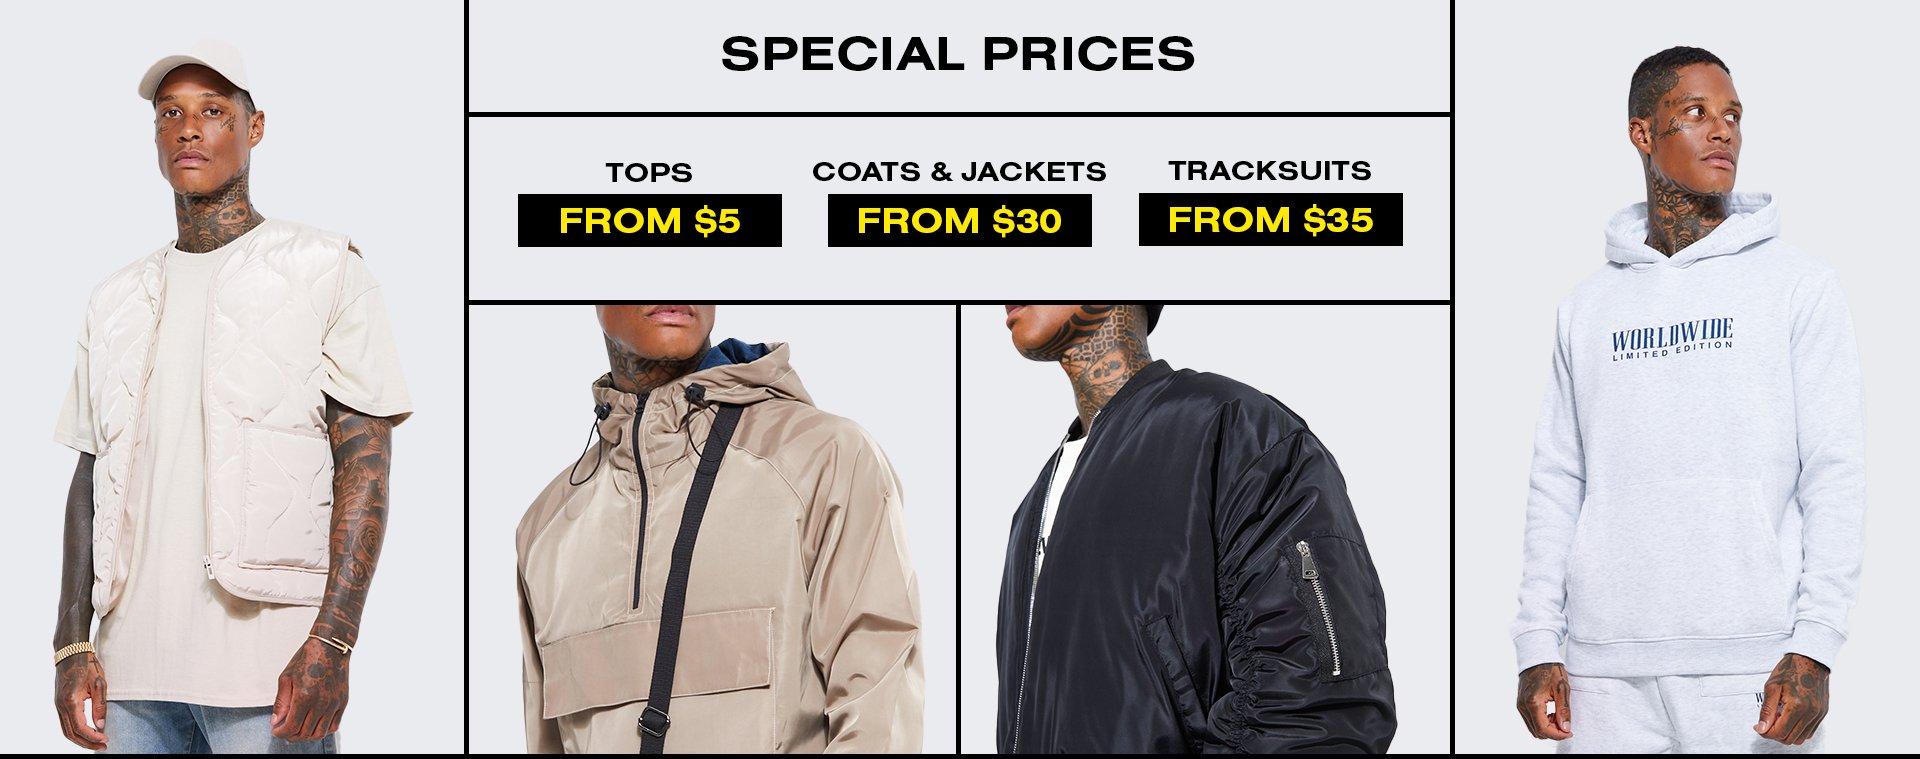 Mens special prices